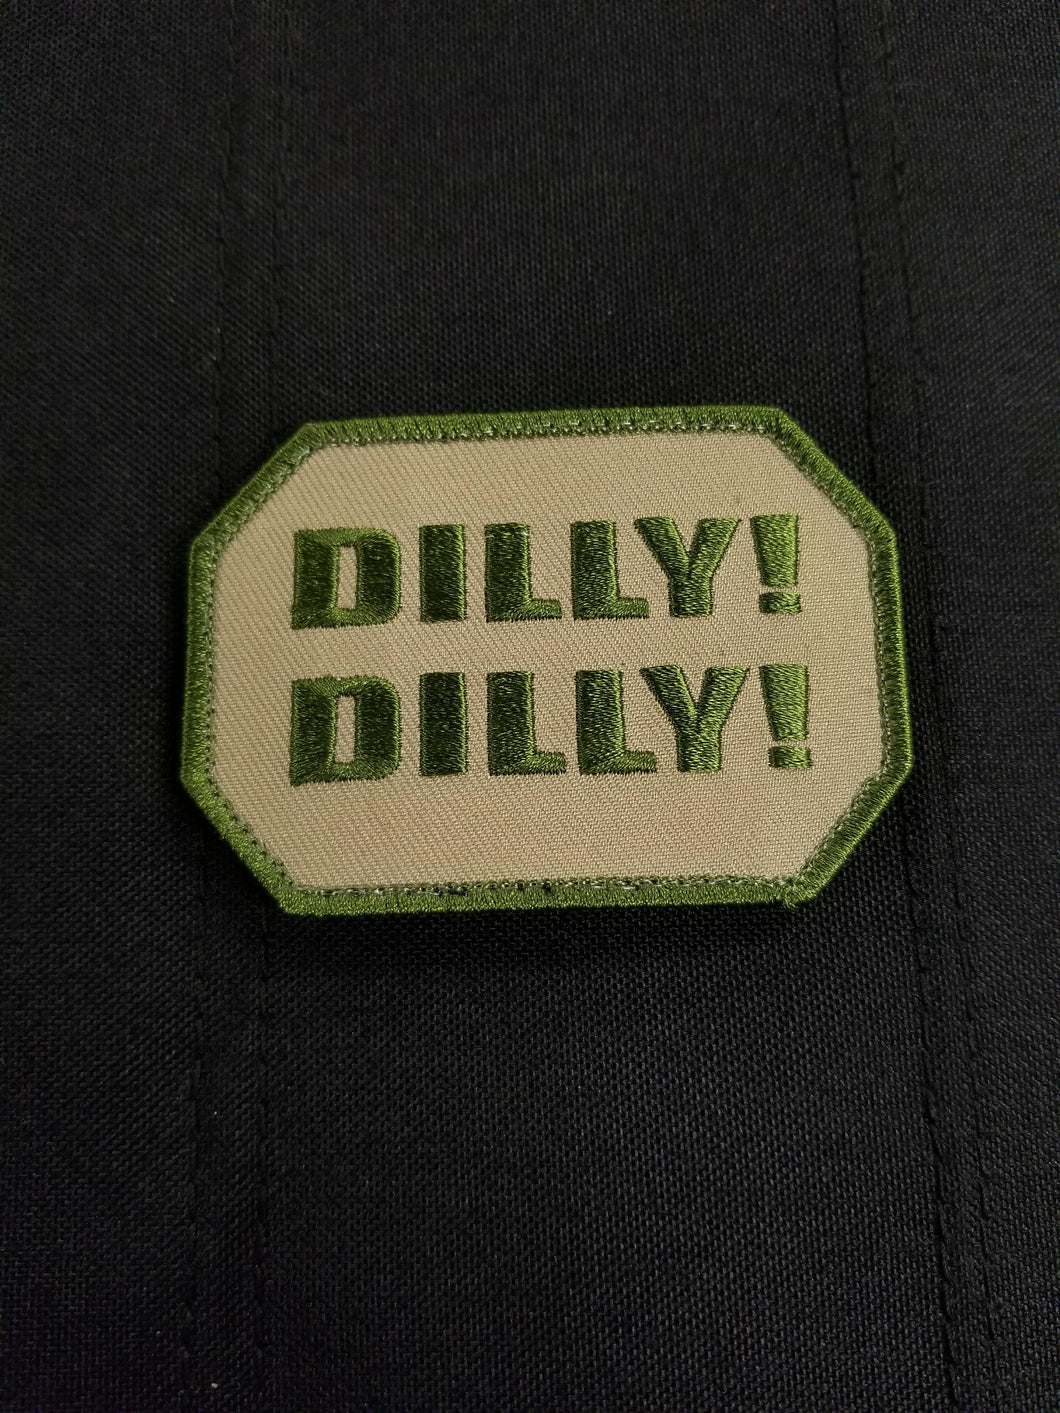 Dilly Dilly!